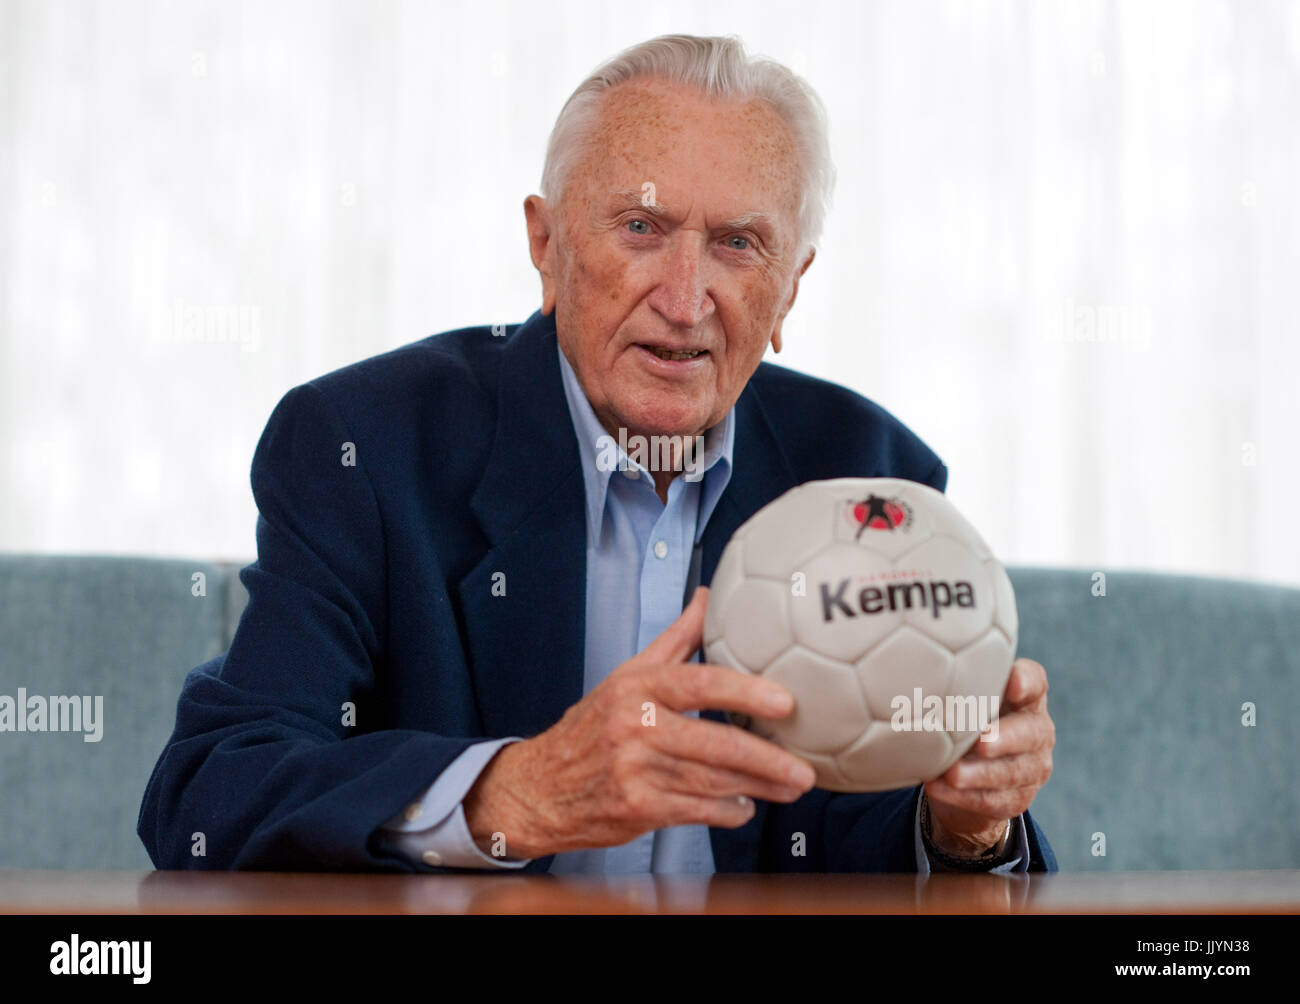 Bad Boll, Germany. 15th Nov, 2010. ARCHIVE - Bernhard Kempa holds a hand  ball in his hands at his house in Bad Boll, Germany, 15 November 2010. The  German handball legend has